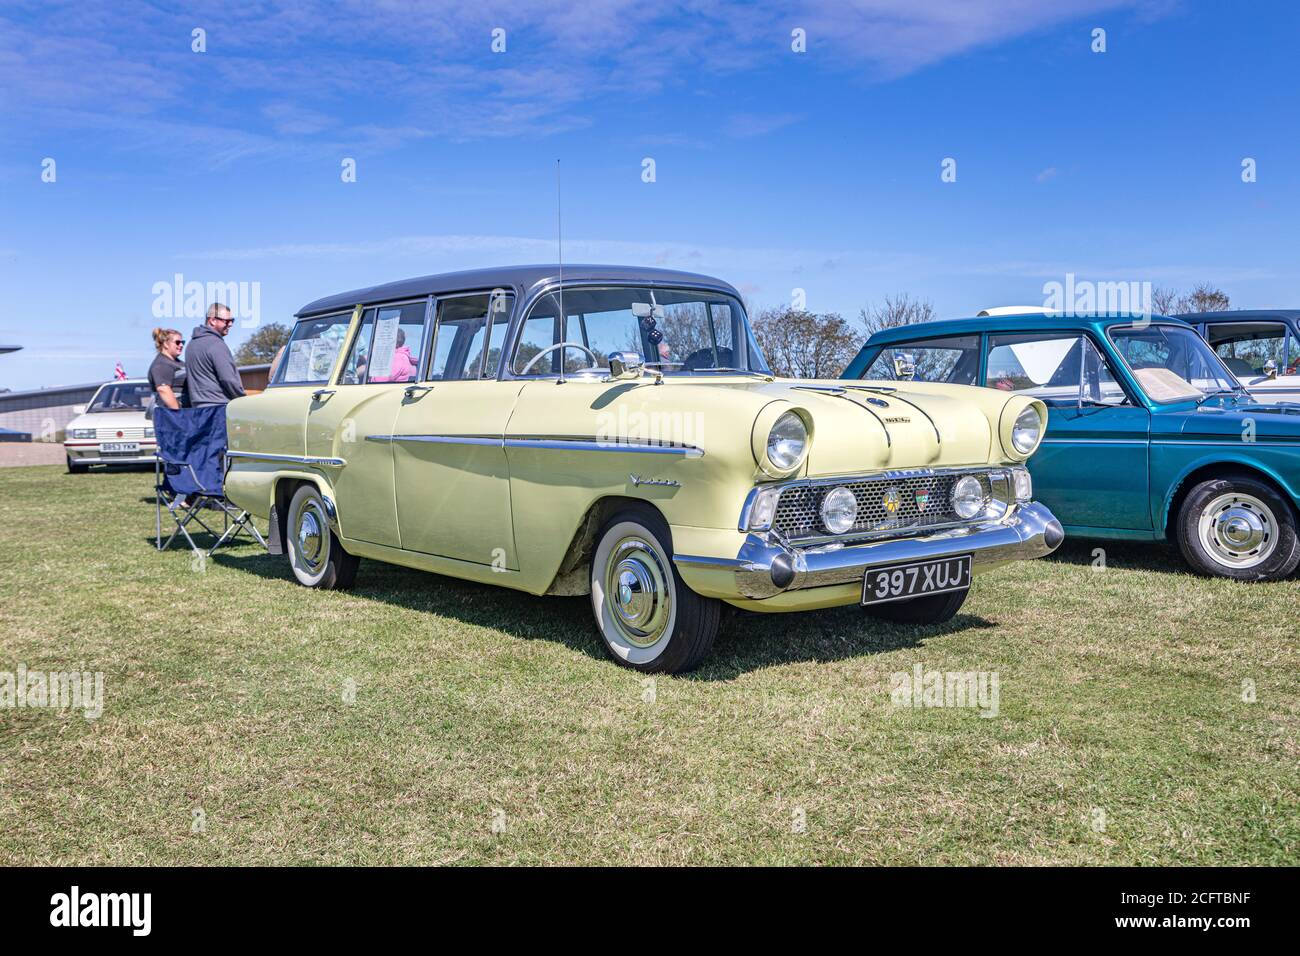 A classic Vauxhall Victor estate car at a car show. Stock Photo